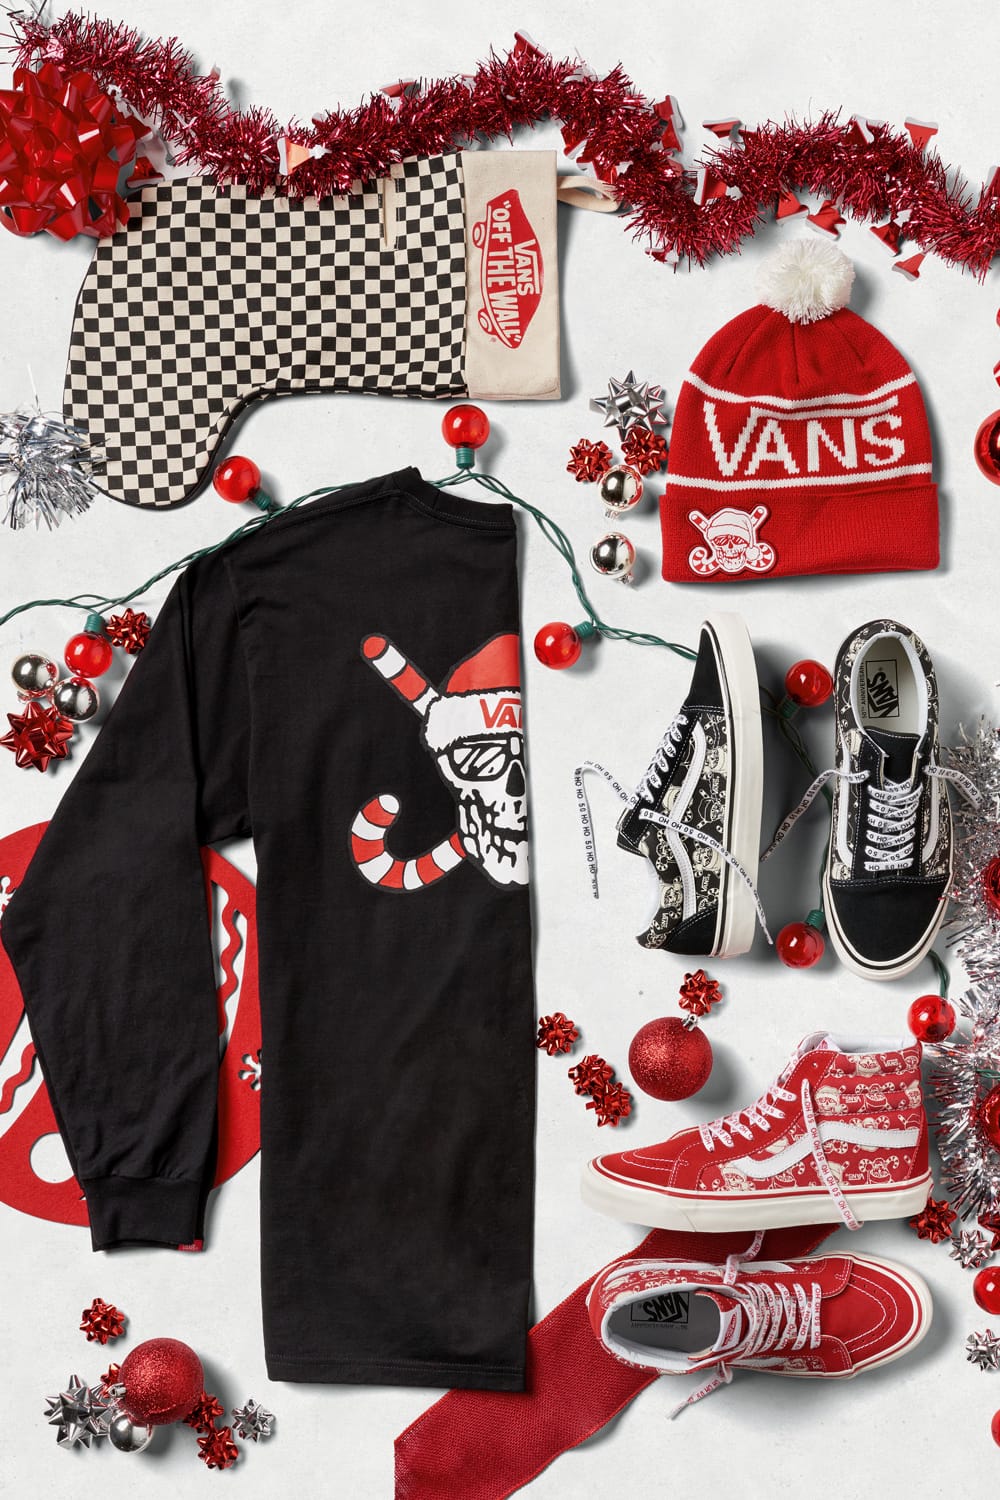 Vans 2016 Holiday Collection Featuring 